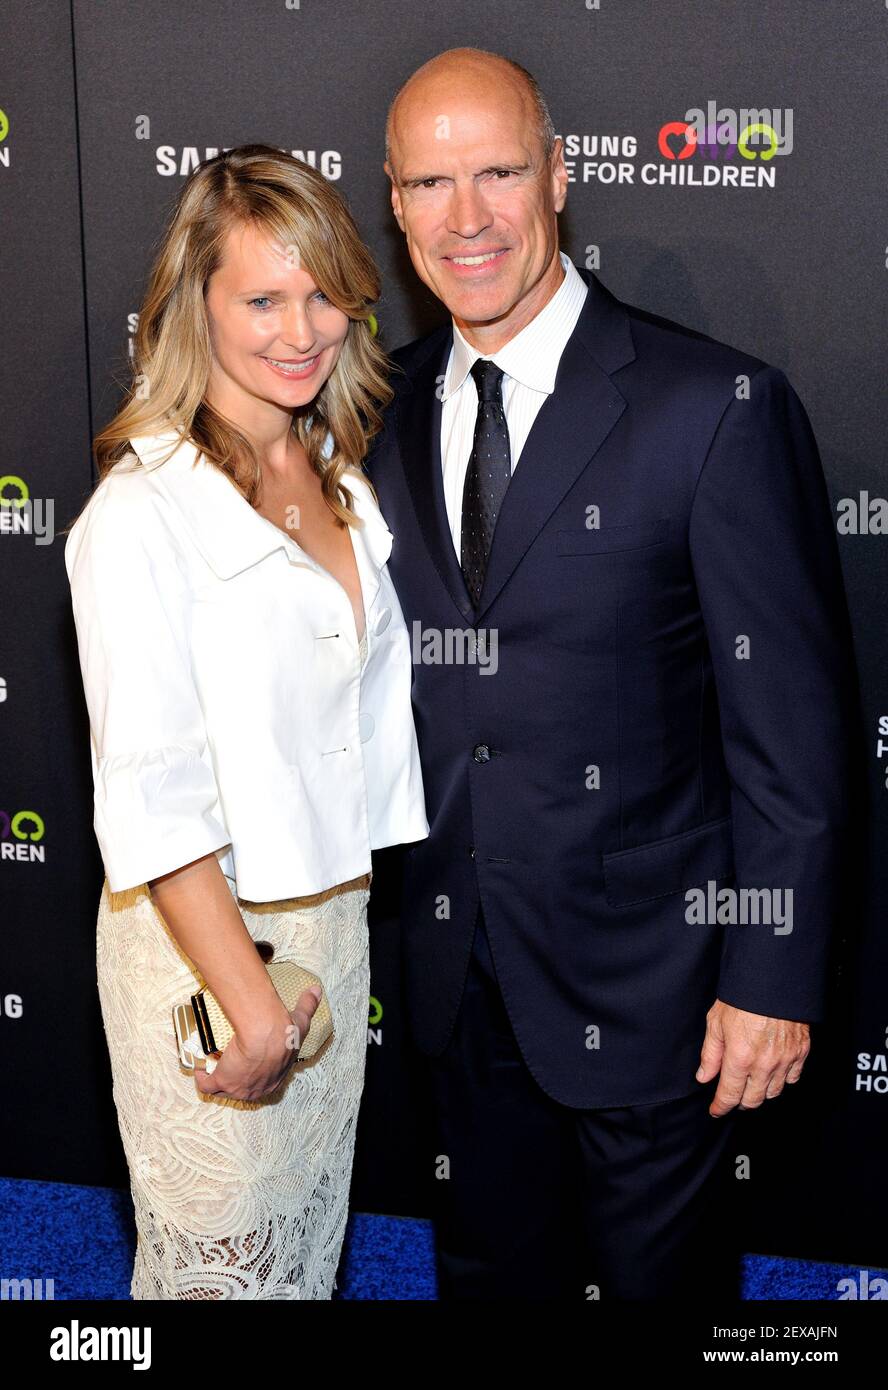 Former NHL player Mark Messier and wife Kim Clark attend the Samsung Hope for Children Gala at the Hammerstein Ballroom in New York, NY on September 17, 2015. (Photo by Stephen Smith) *** Please Use Credit from Credit Field *** Stock Photo